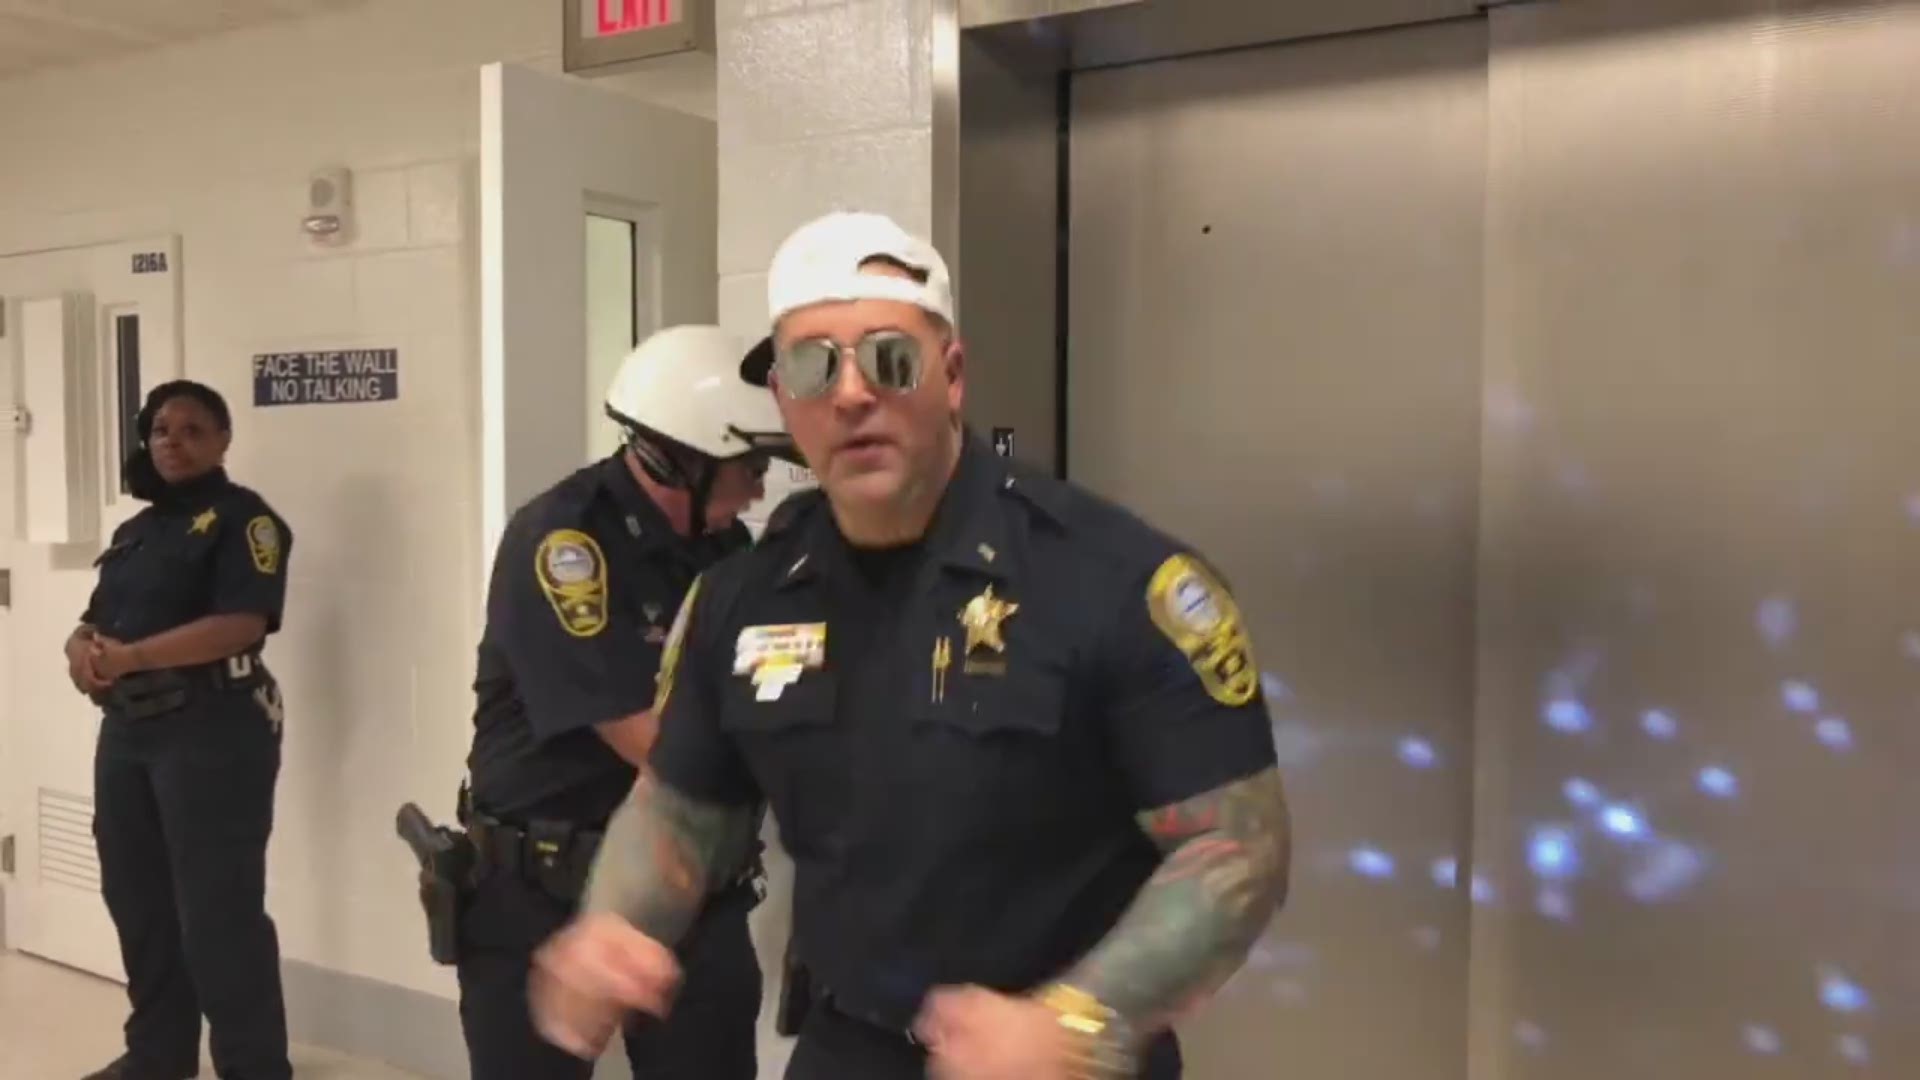 The Norfolk Sheriff's Office chose a number of hit songs for their version of the #LipSyncChallenge.